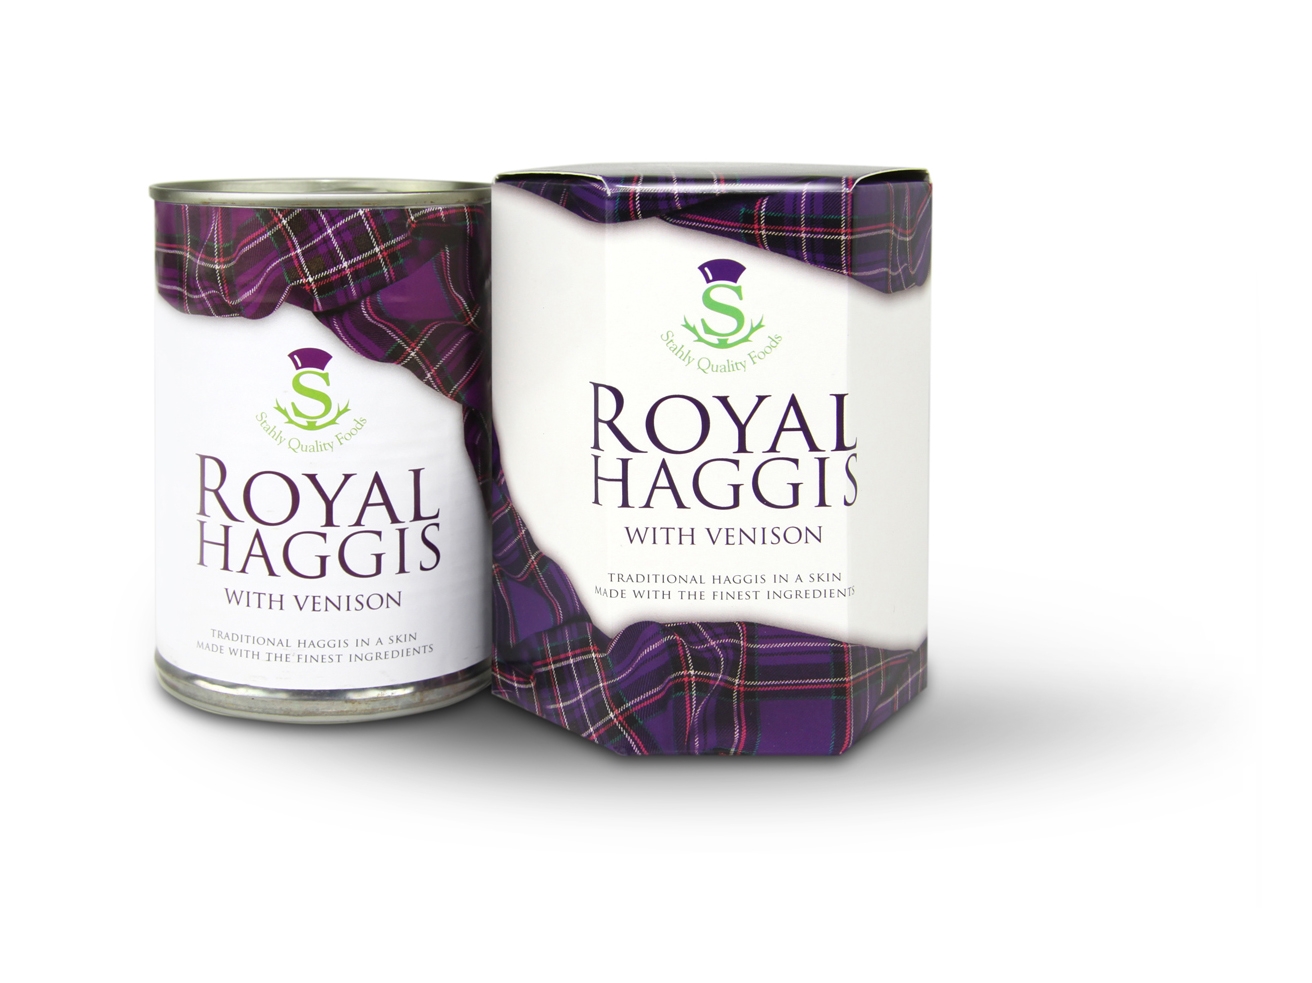 Royal Haggis in a skin - made with venison